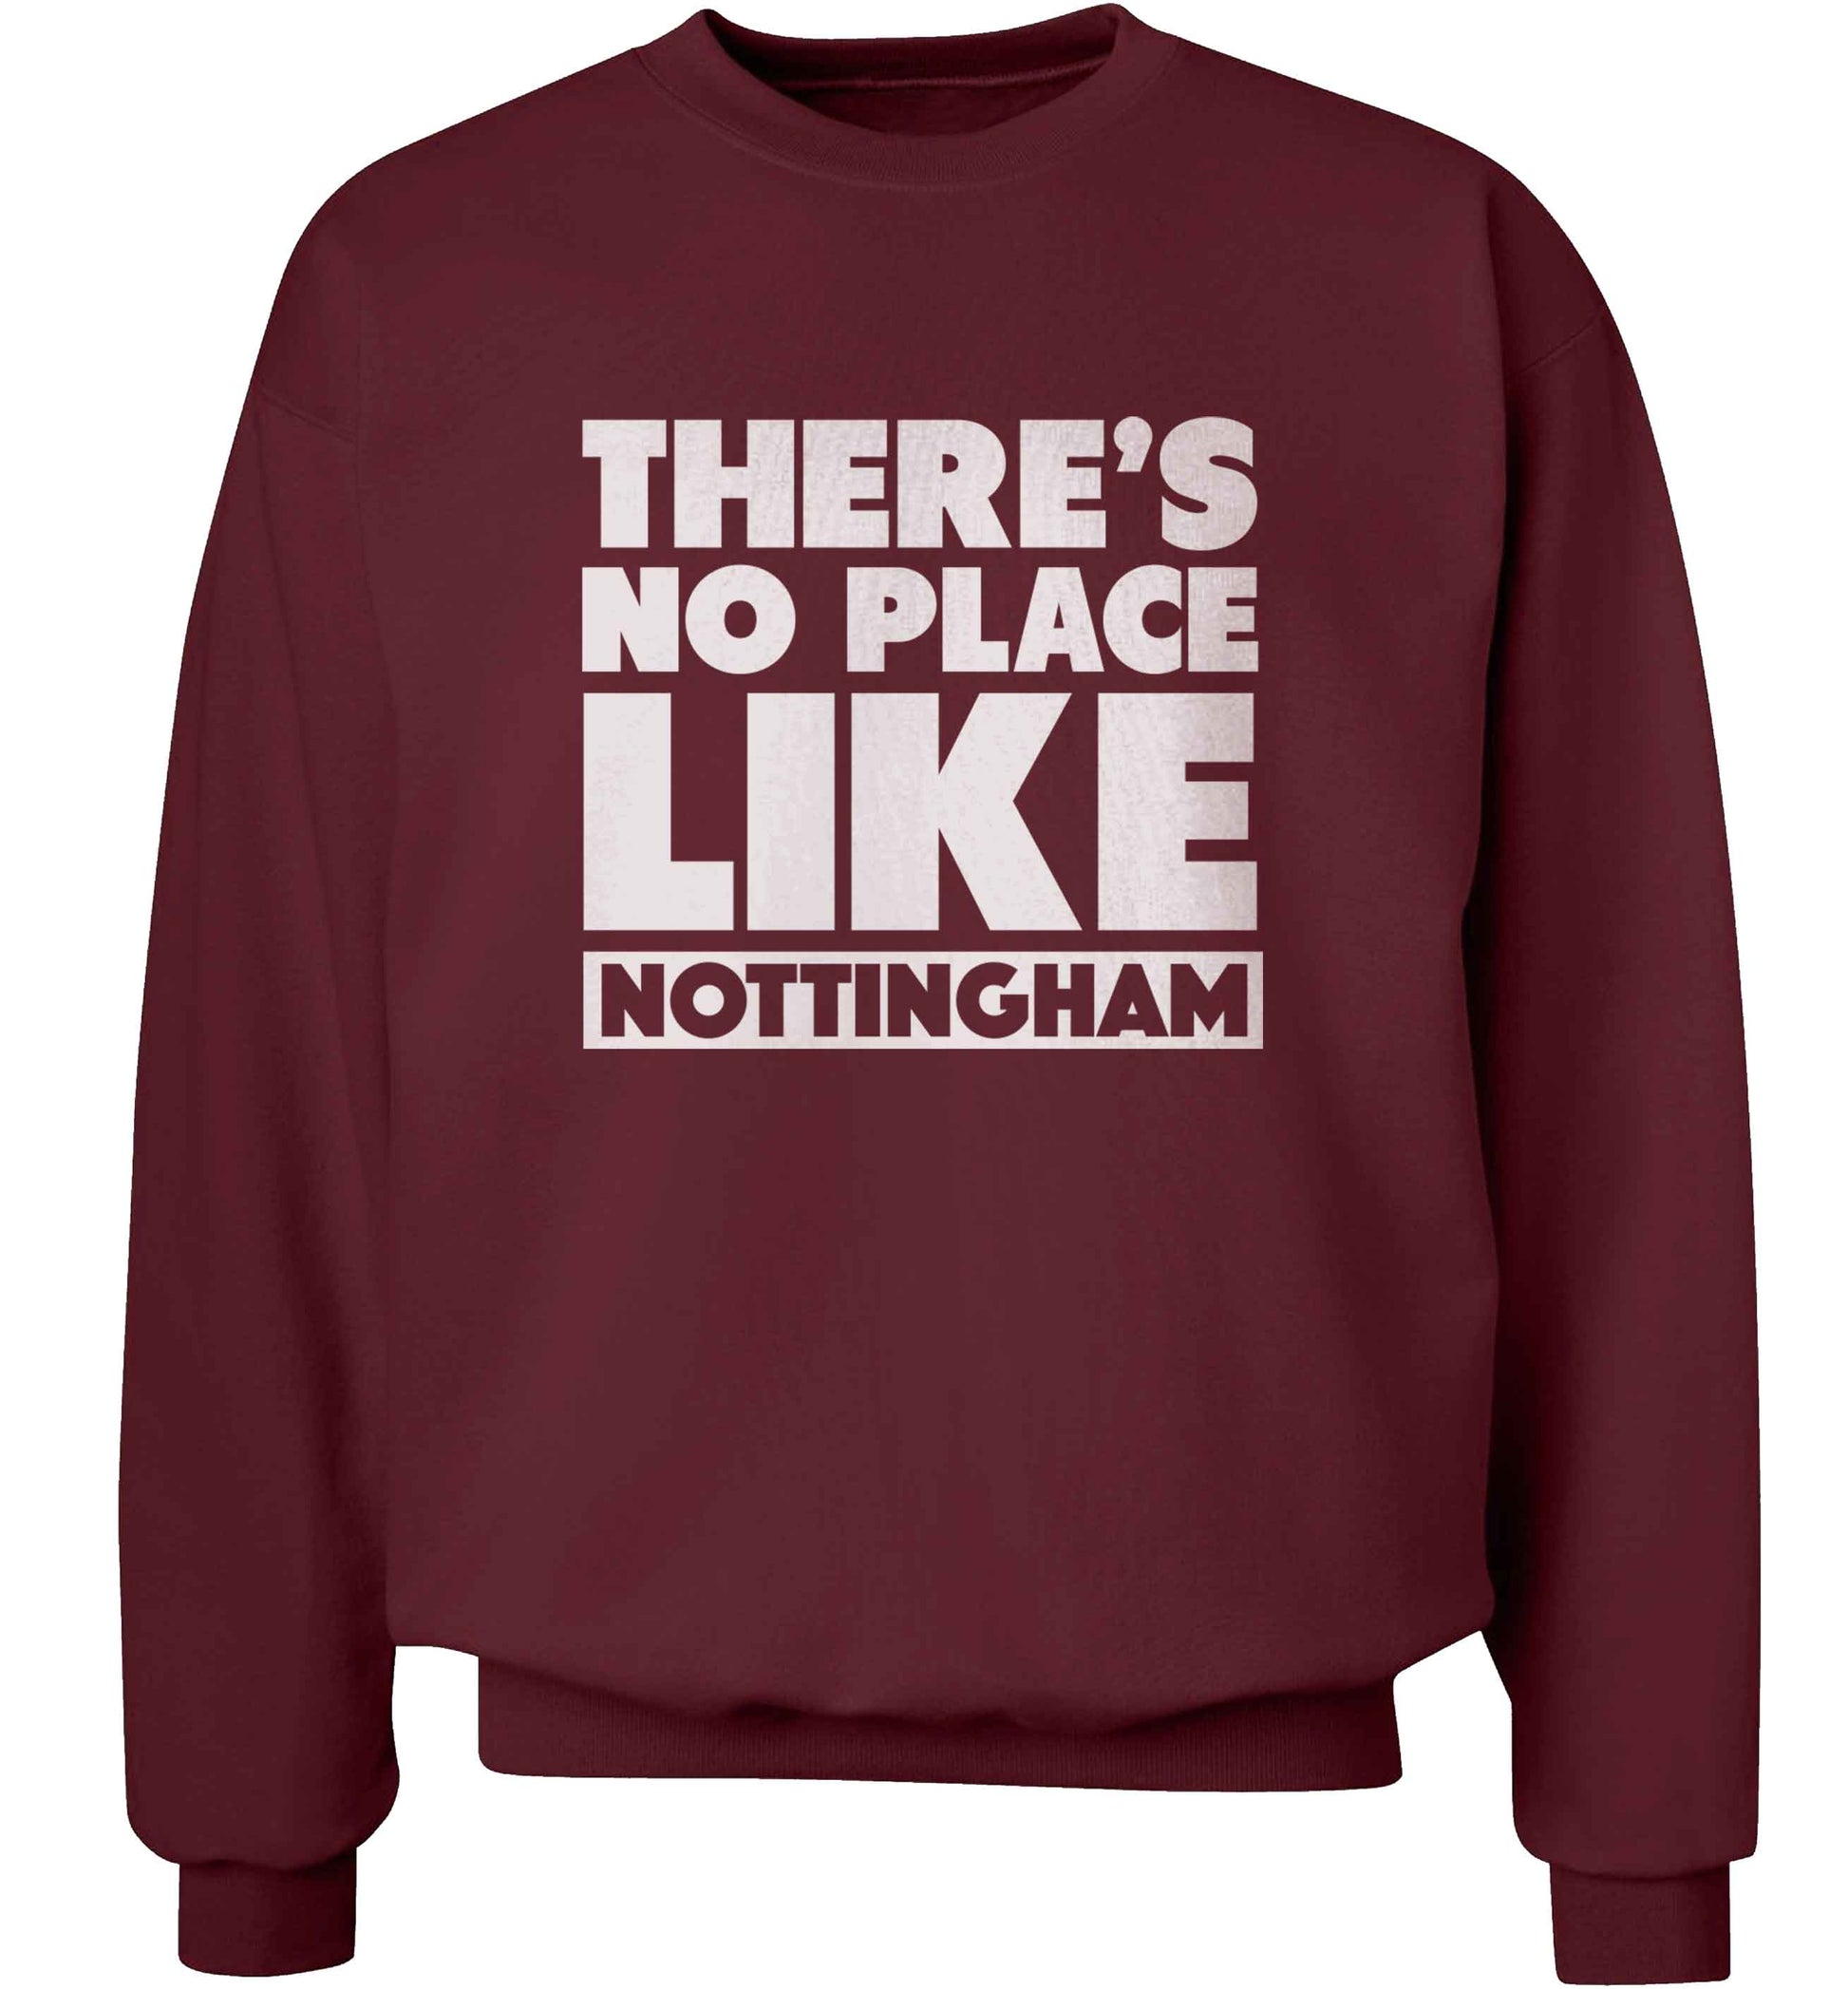 There's no place like Nottingham adult's unisex maroon sweater 2XL